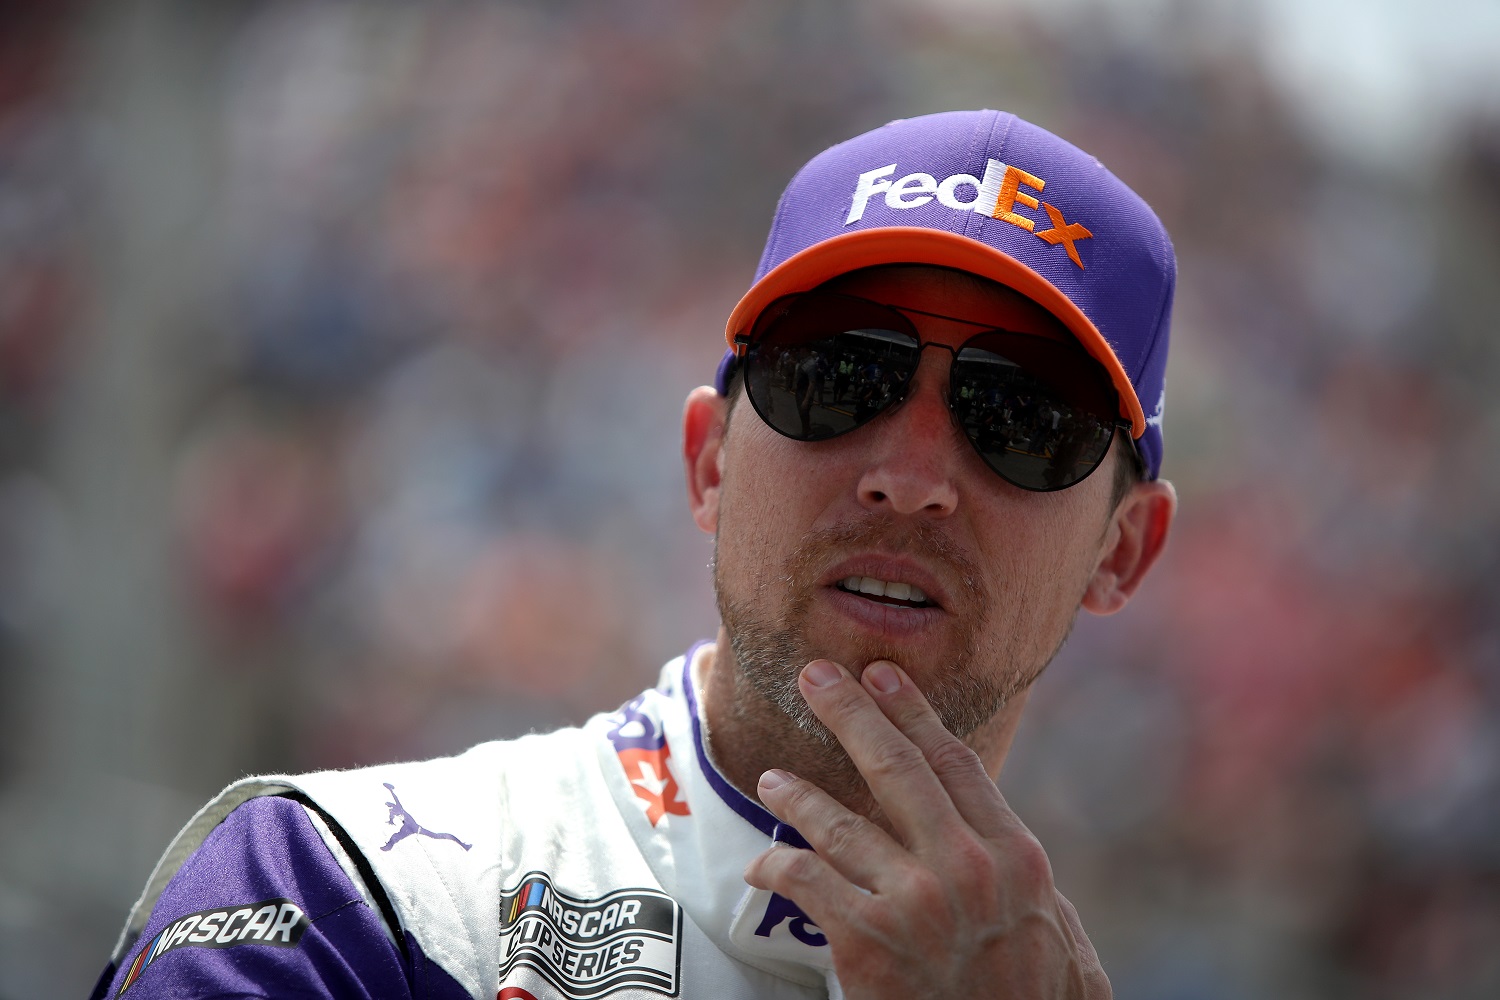 Michael Jordan and Denny Hamlin Turned a Faulty Report Into 23XI Racing in the NASCAR Cup Series